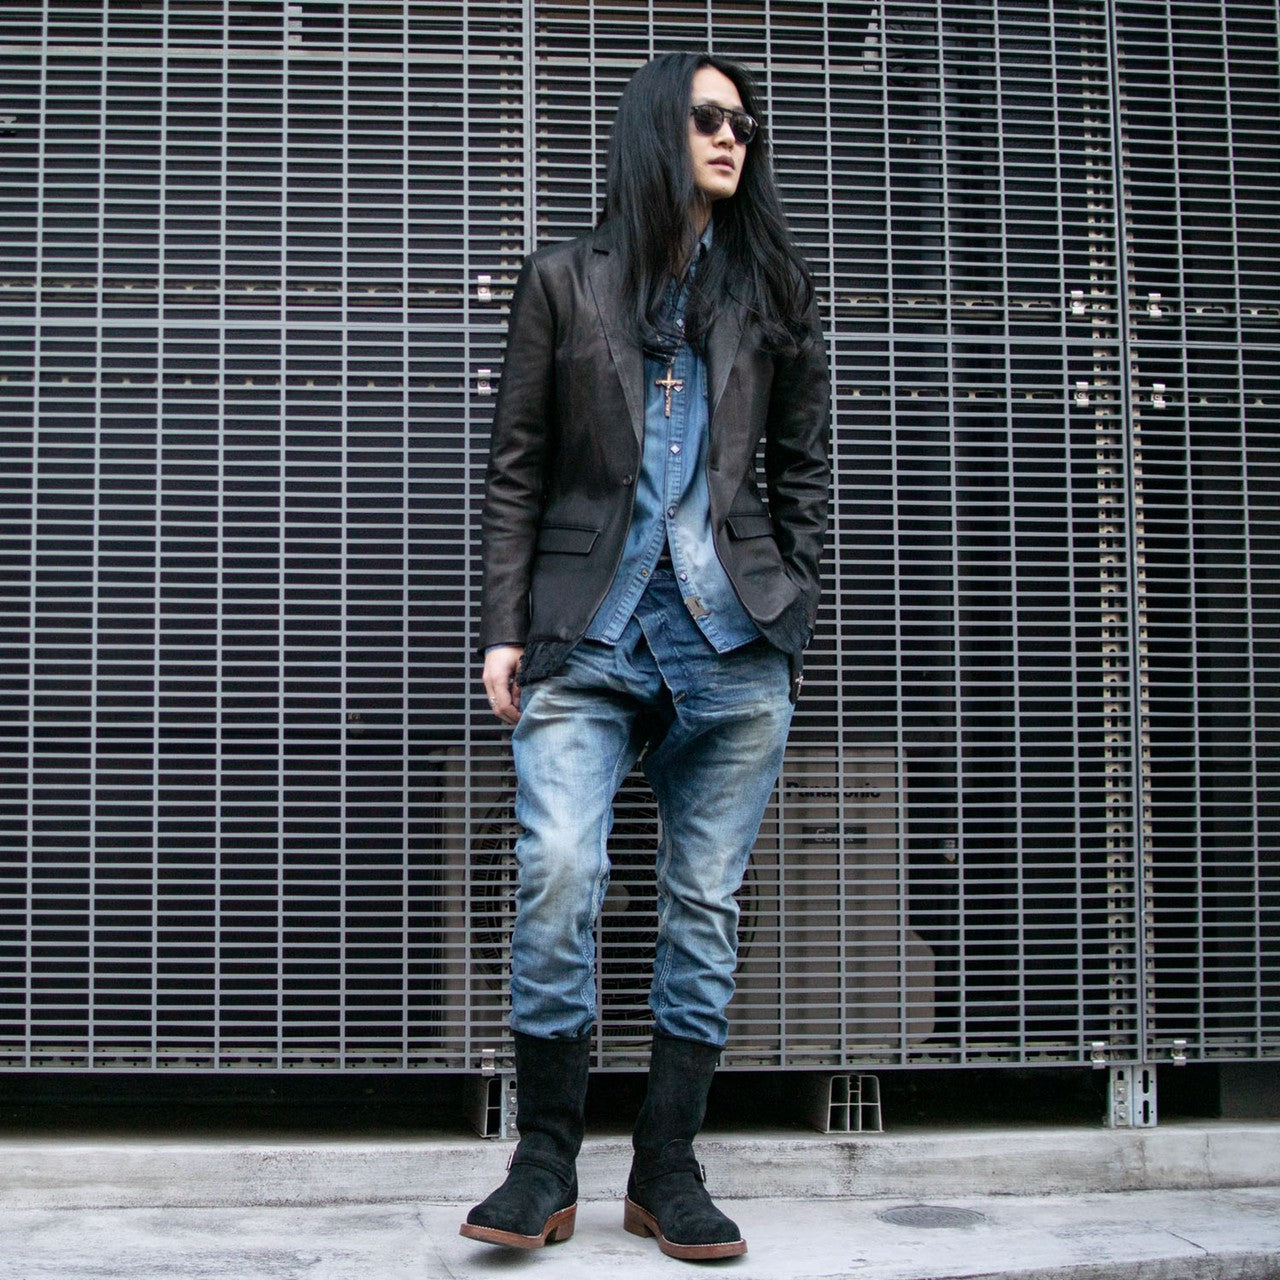 Coordinates using the classic men's item for early spring, "Jeans"!